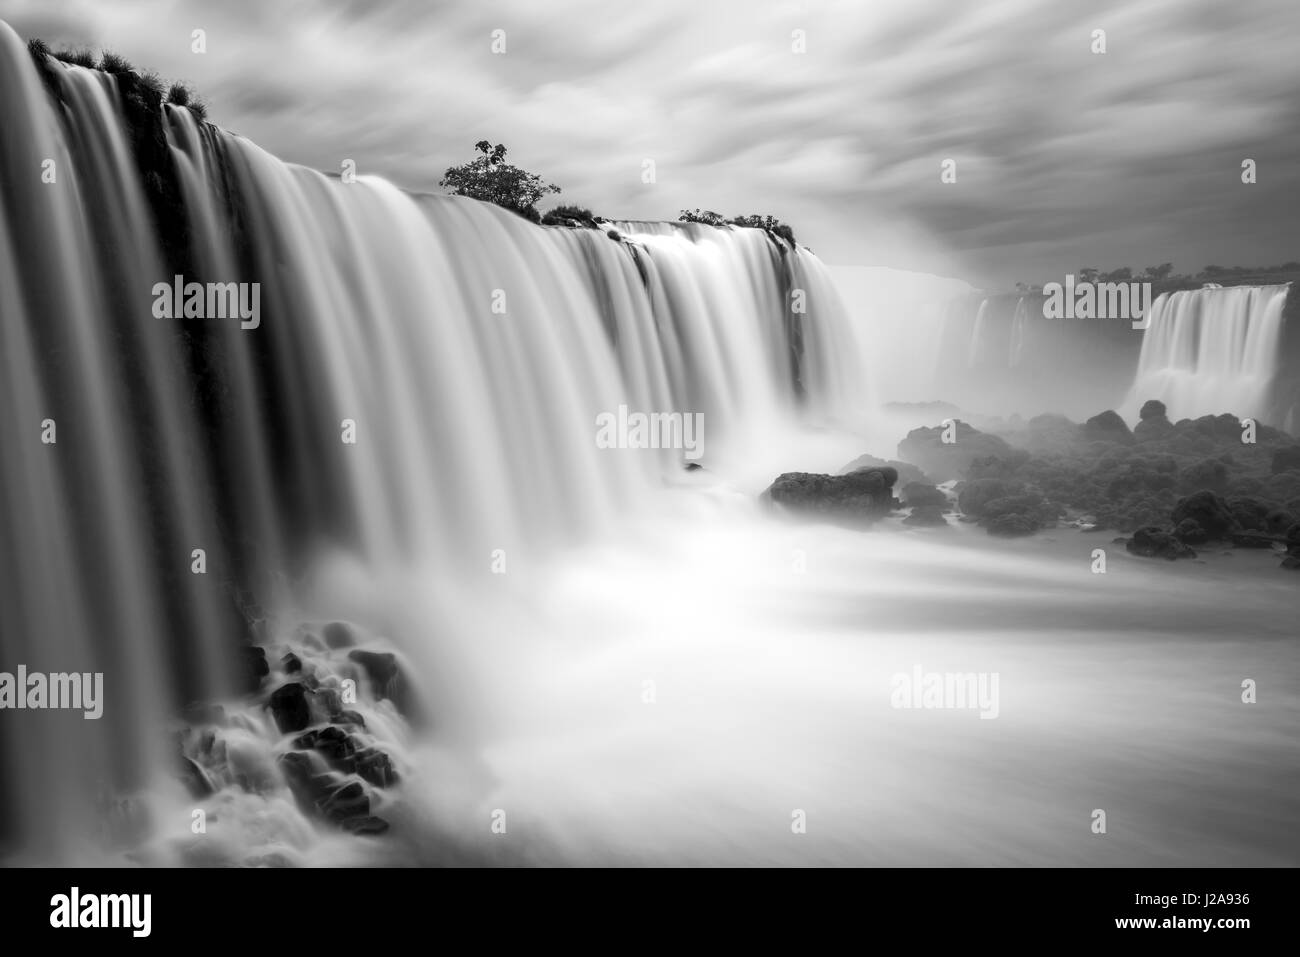 The Iguazu waterfalls with a long exposure in black and white, Brazil. Stock Photo